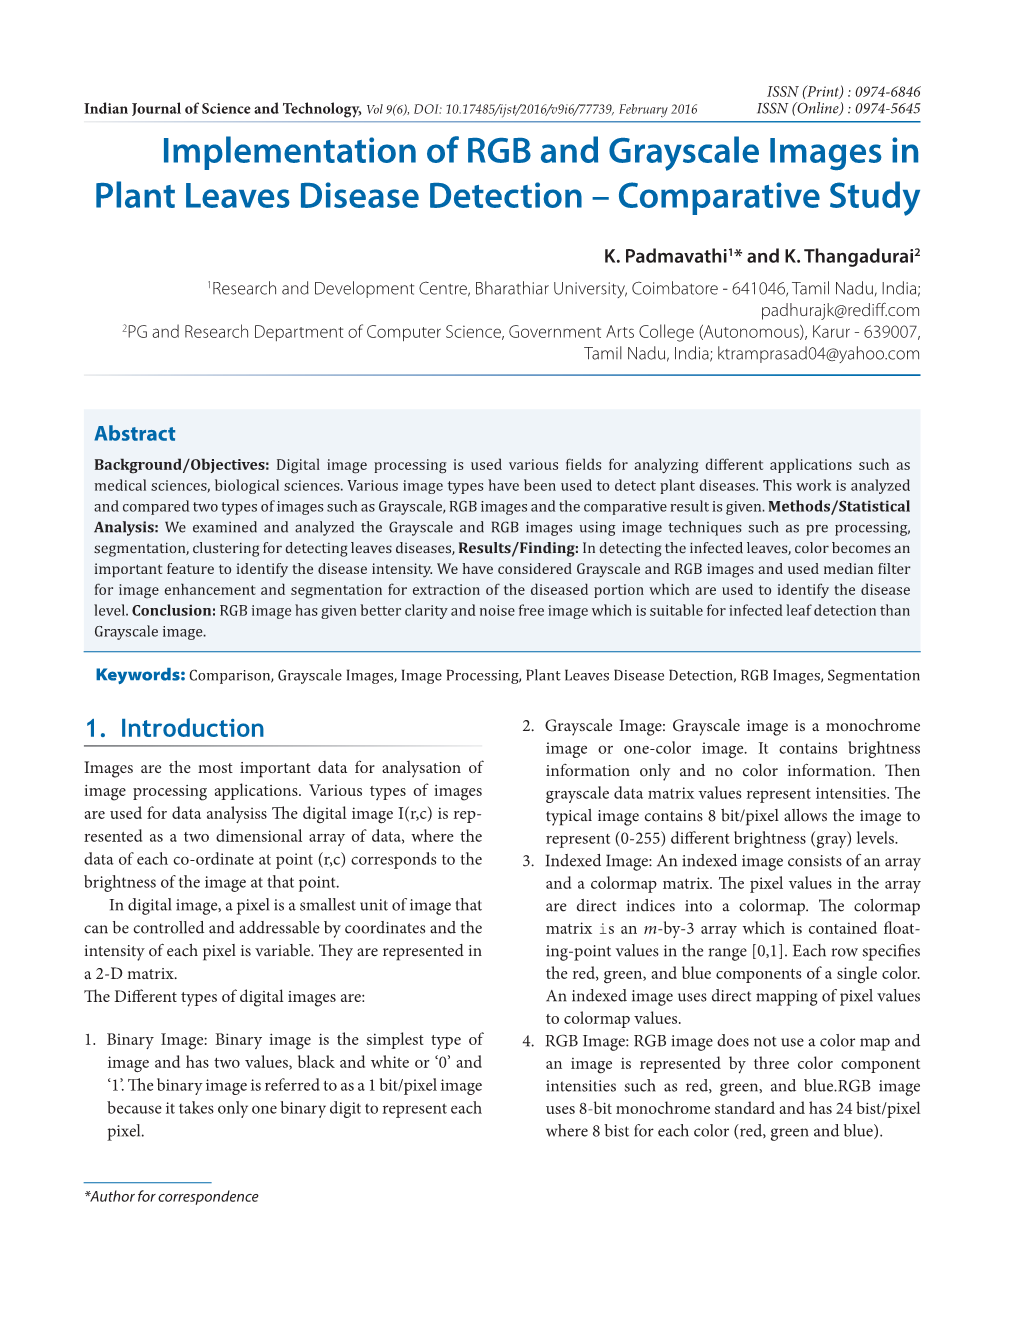 Implementation of RGB and Grayscale Images in Plant Leaves Disease Detection – Comparative Study